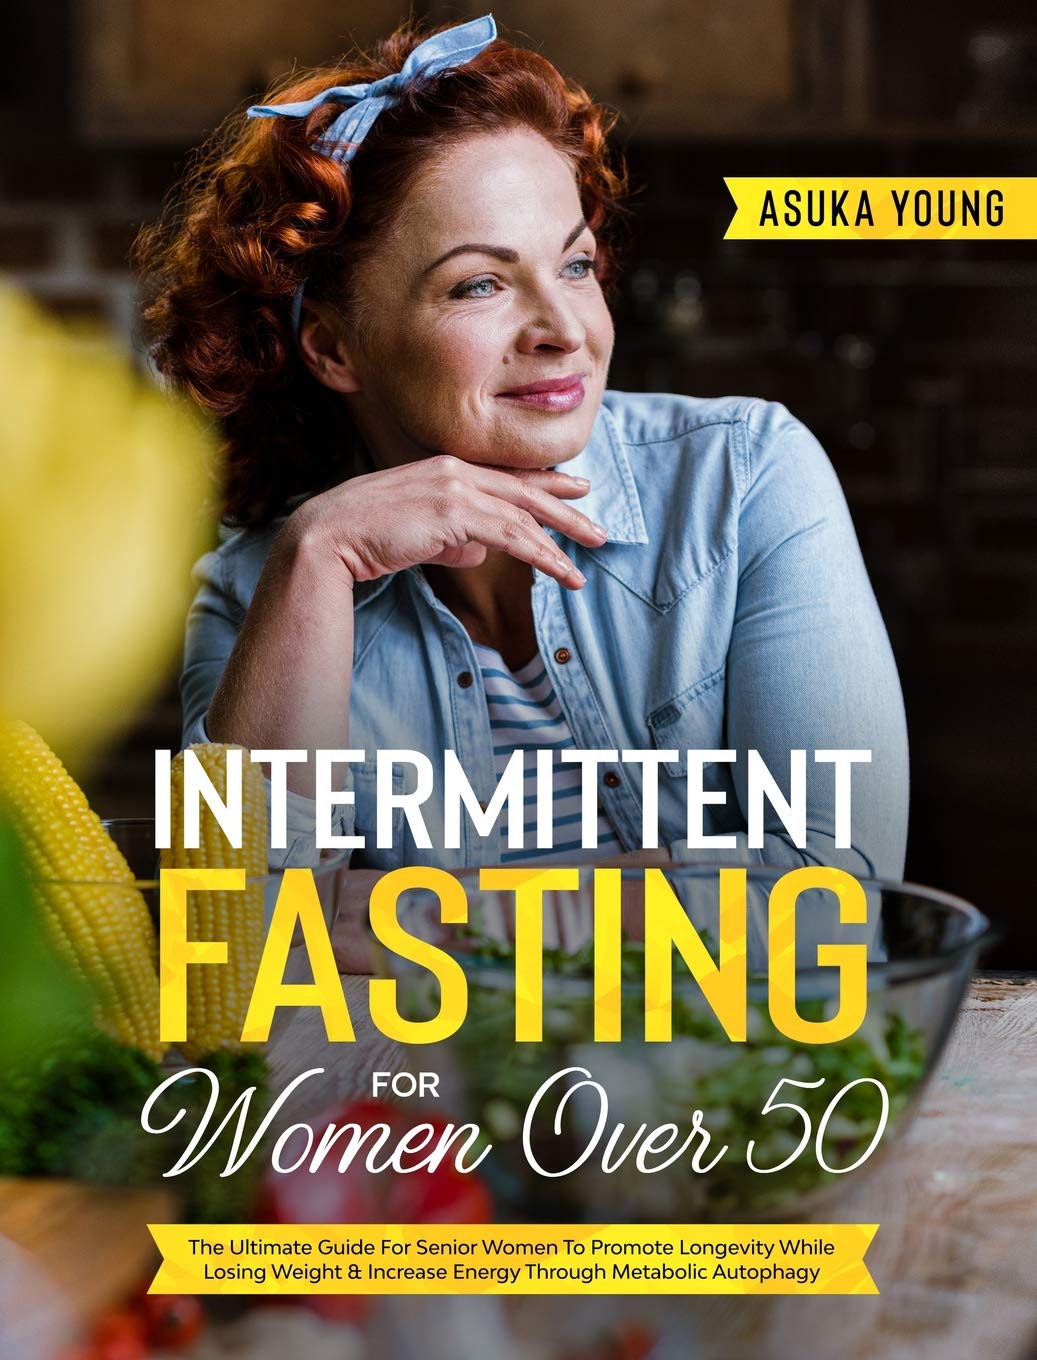 Intermittent Fasting For Women Over 50: The Ultimate Guide For Senior Women To Promote Longevity While Losing Weight & Increase Energy Through Metabolic Autophagy